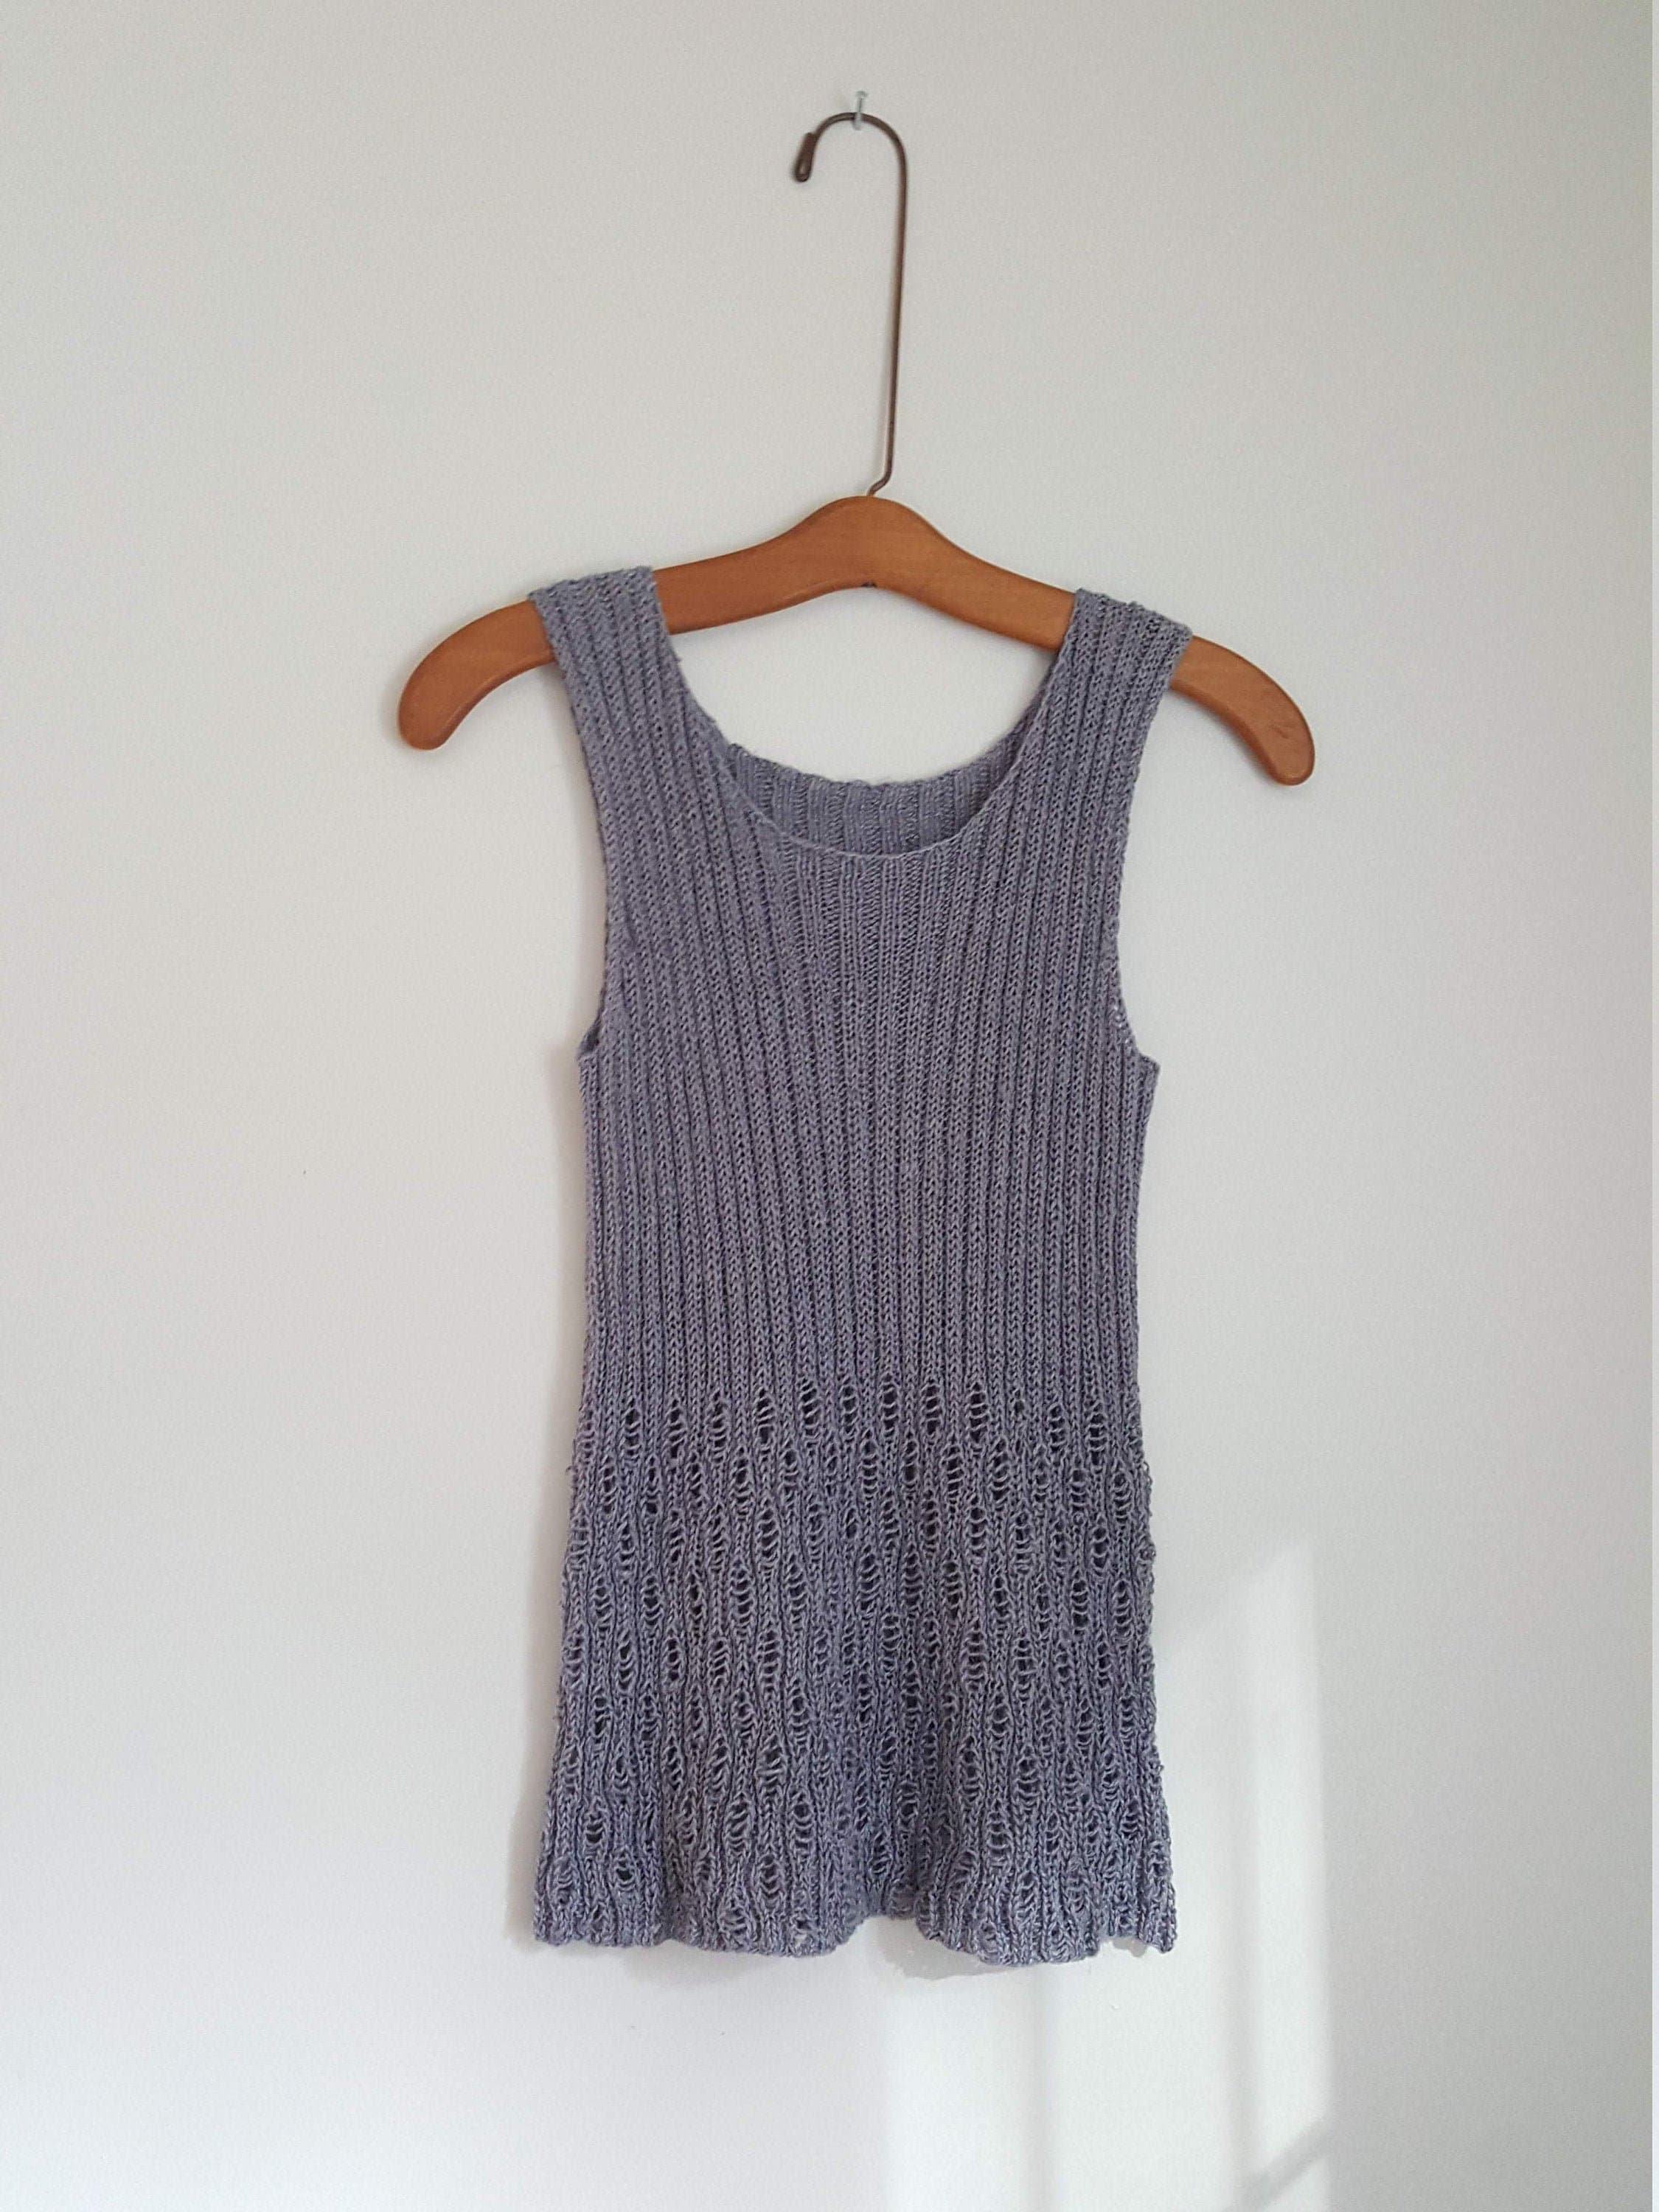 4 sizes - Sleeveless Linen Top Knitting Pattern Instant Download for ...